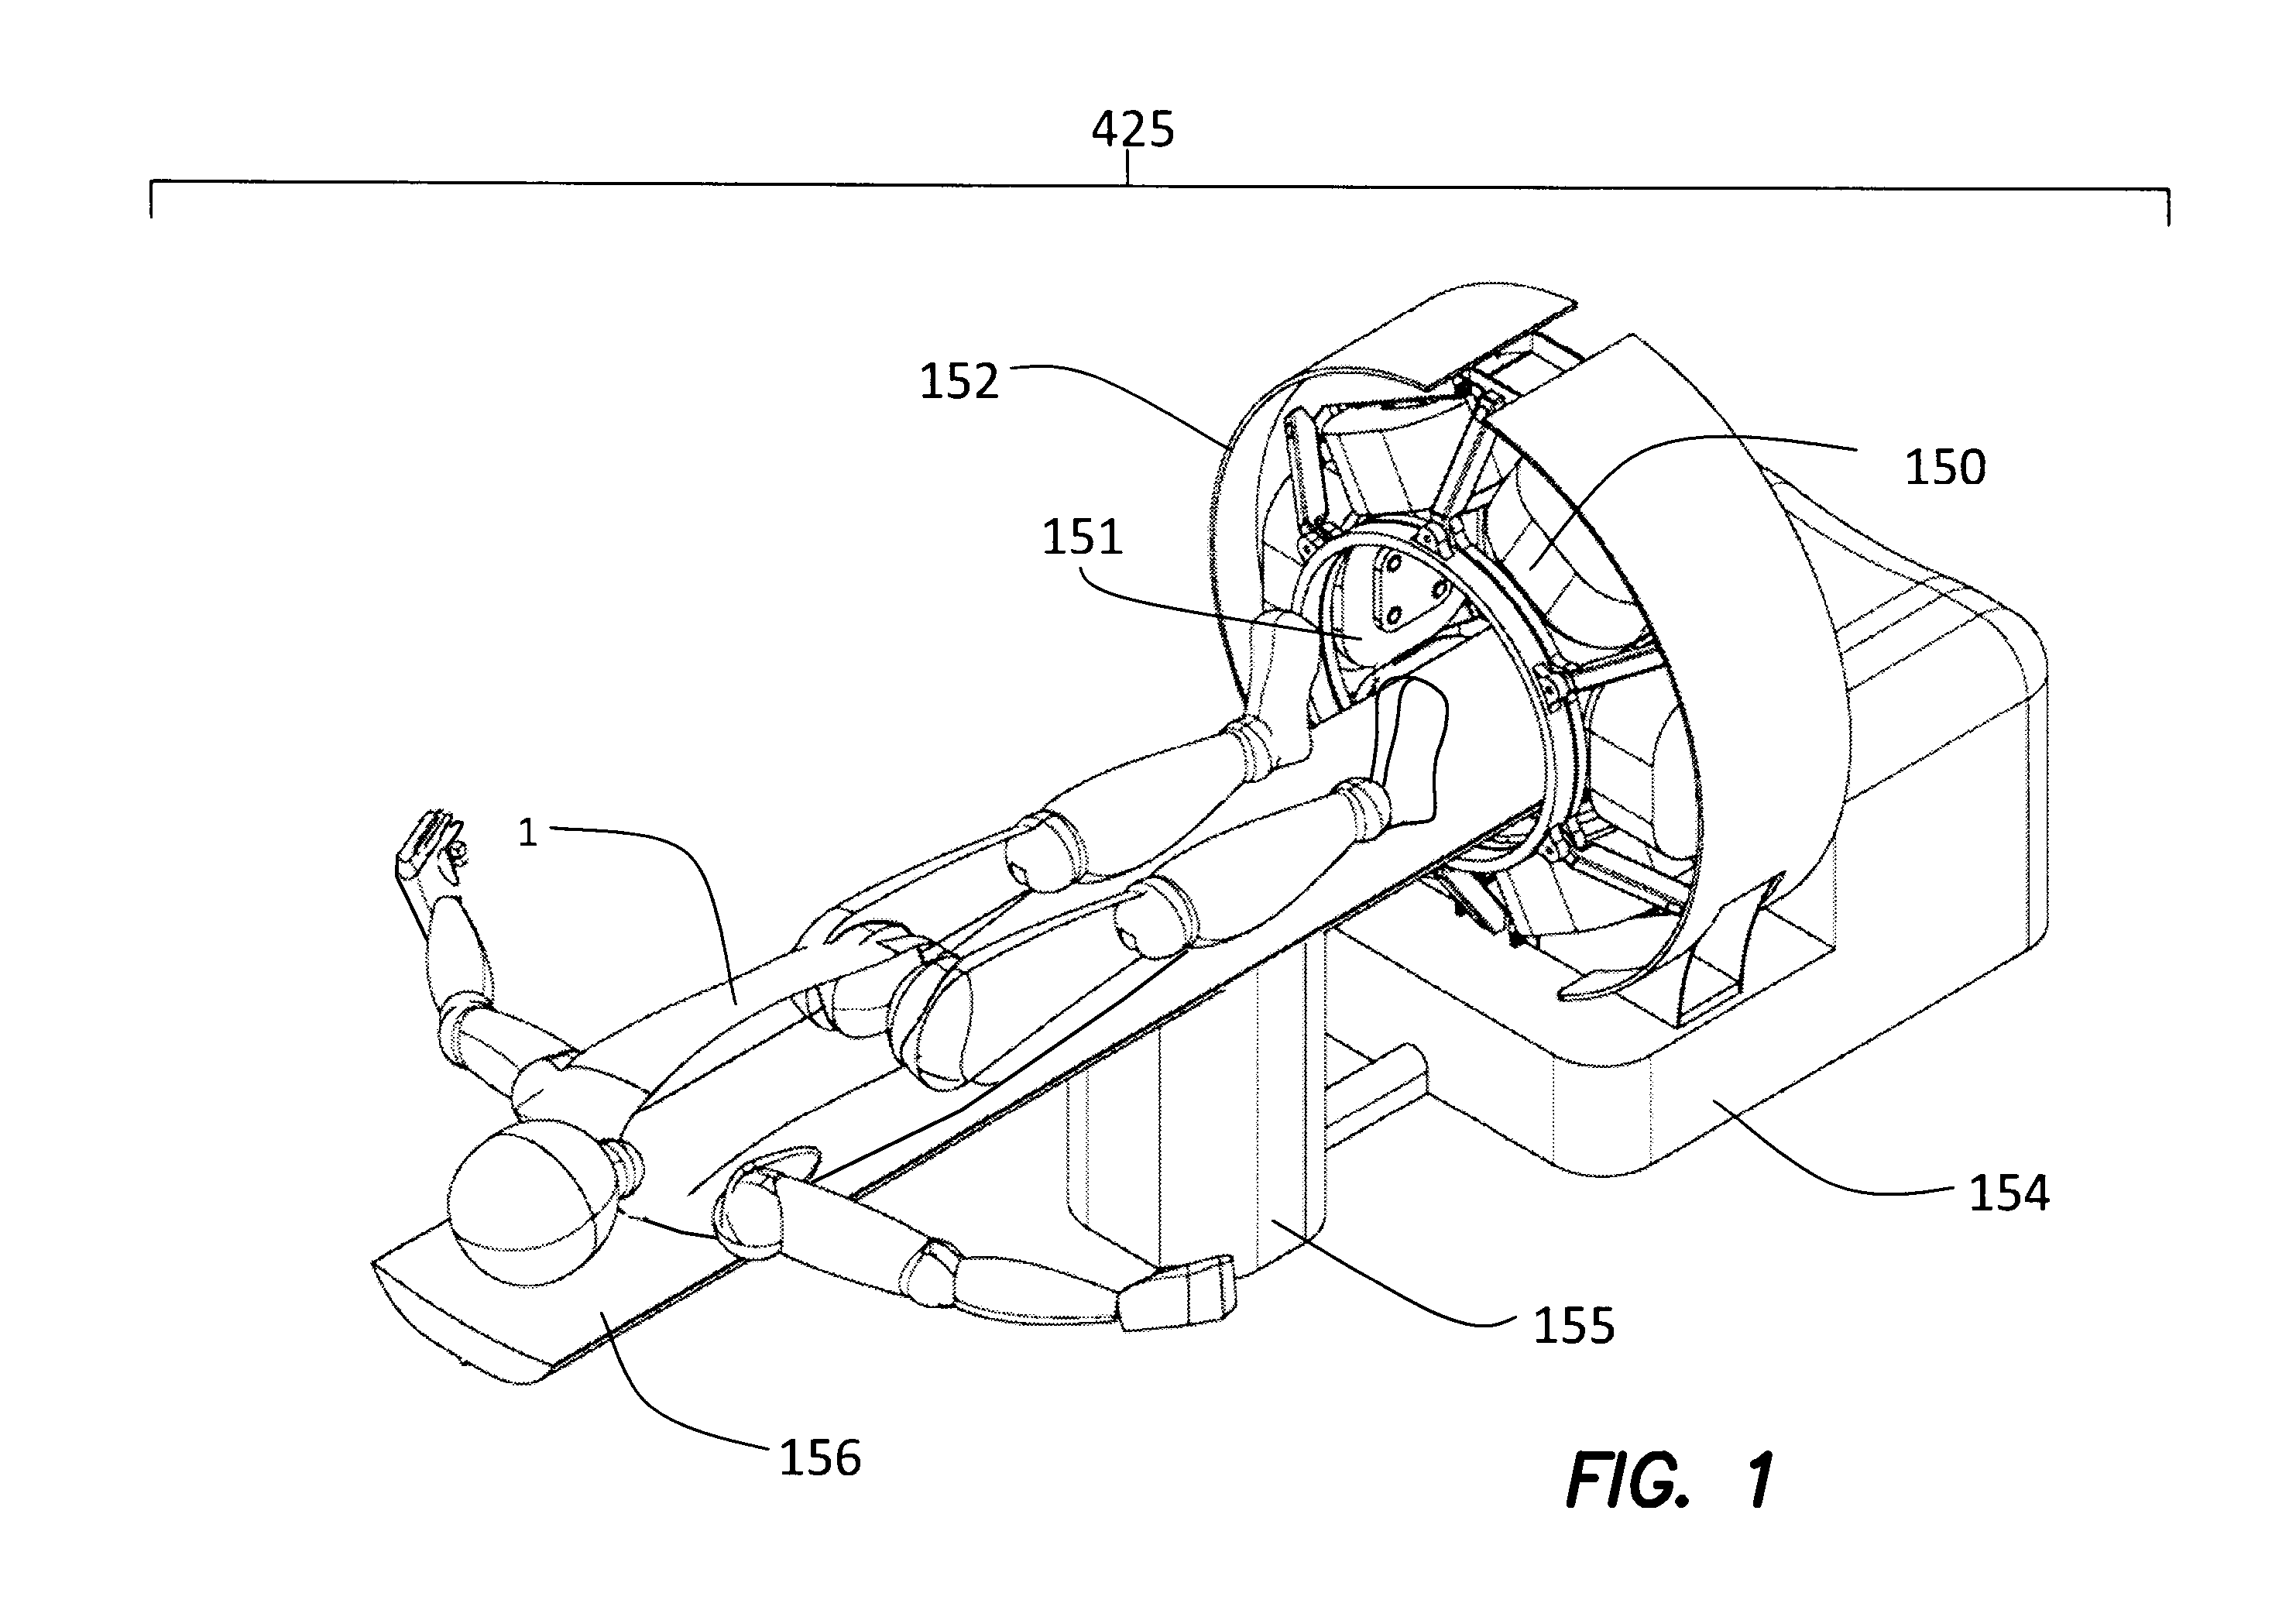 Diagnostic and therapeutic magnetic propulsion capsule and method for using the same